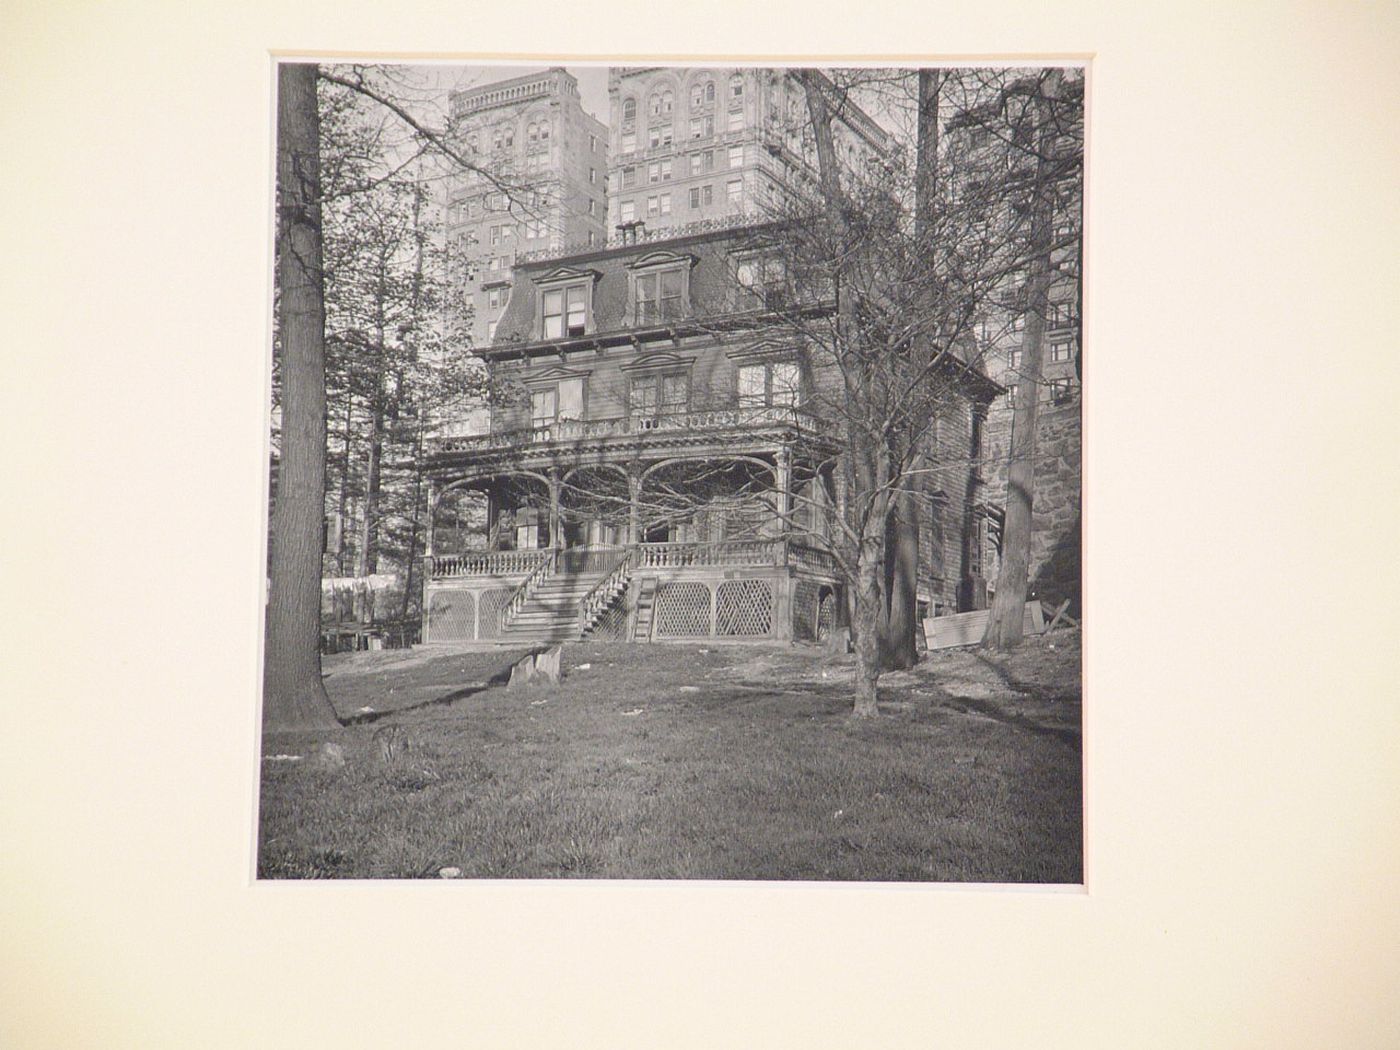 Wooden house with trees surrounding, Stone wall and tall stone buildings behind, New York City, New York